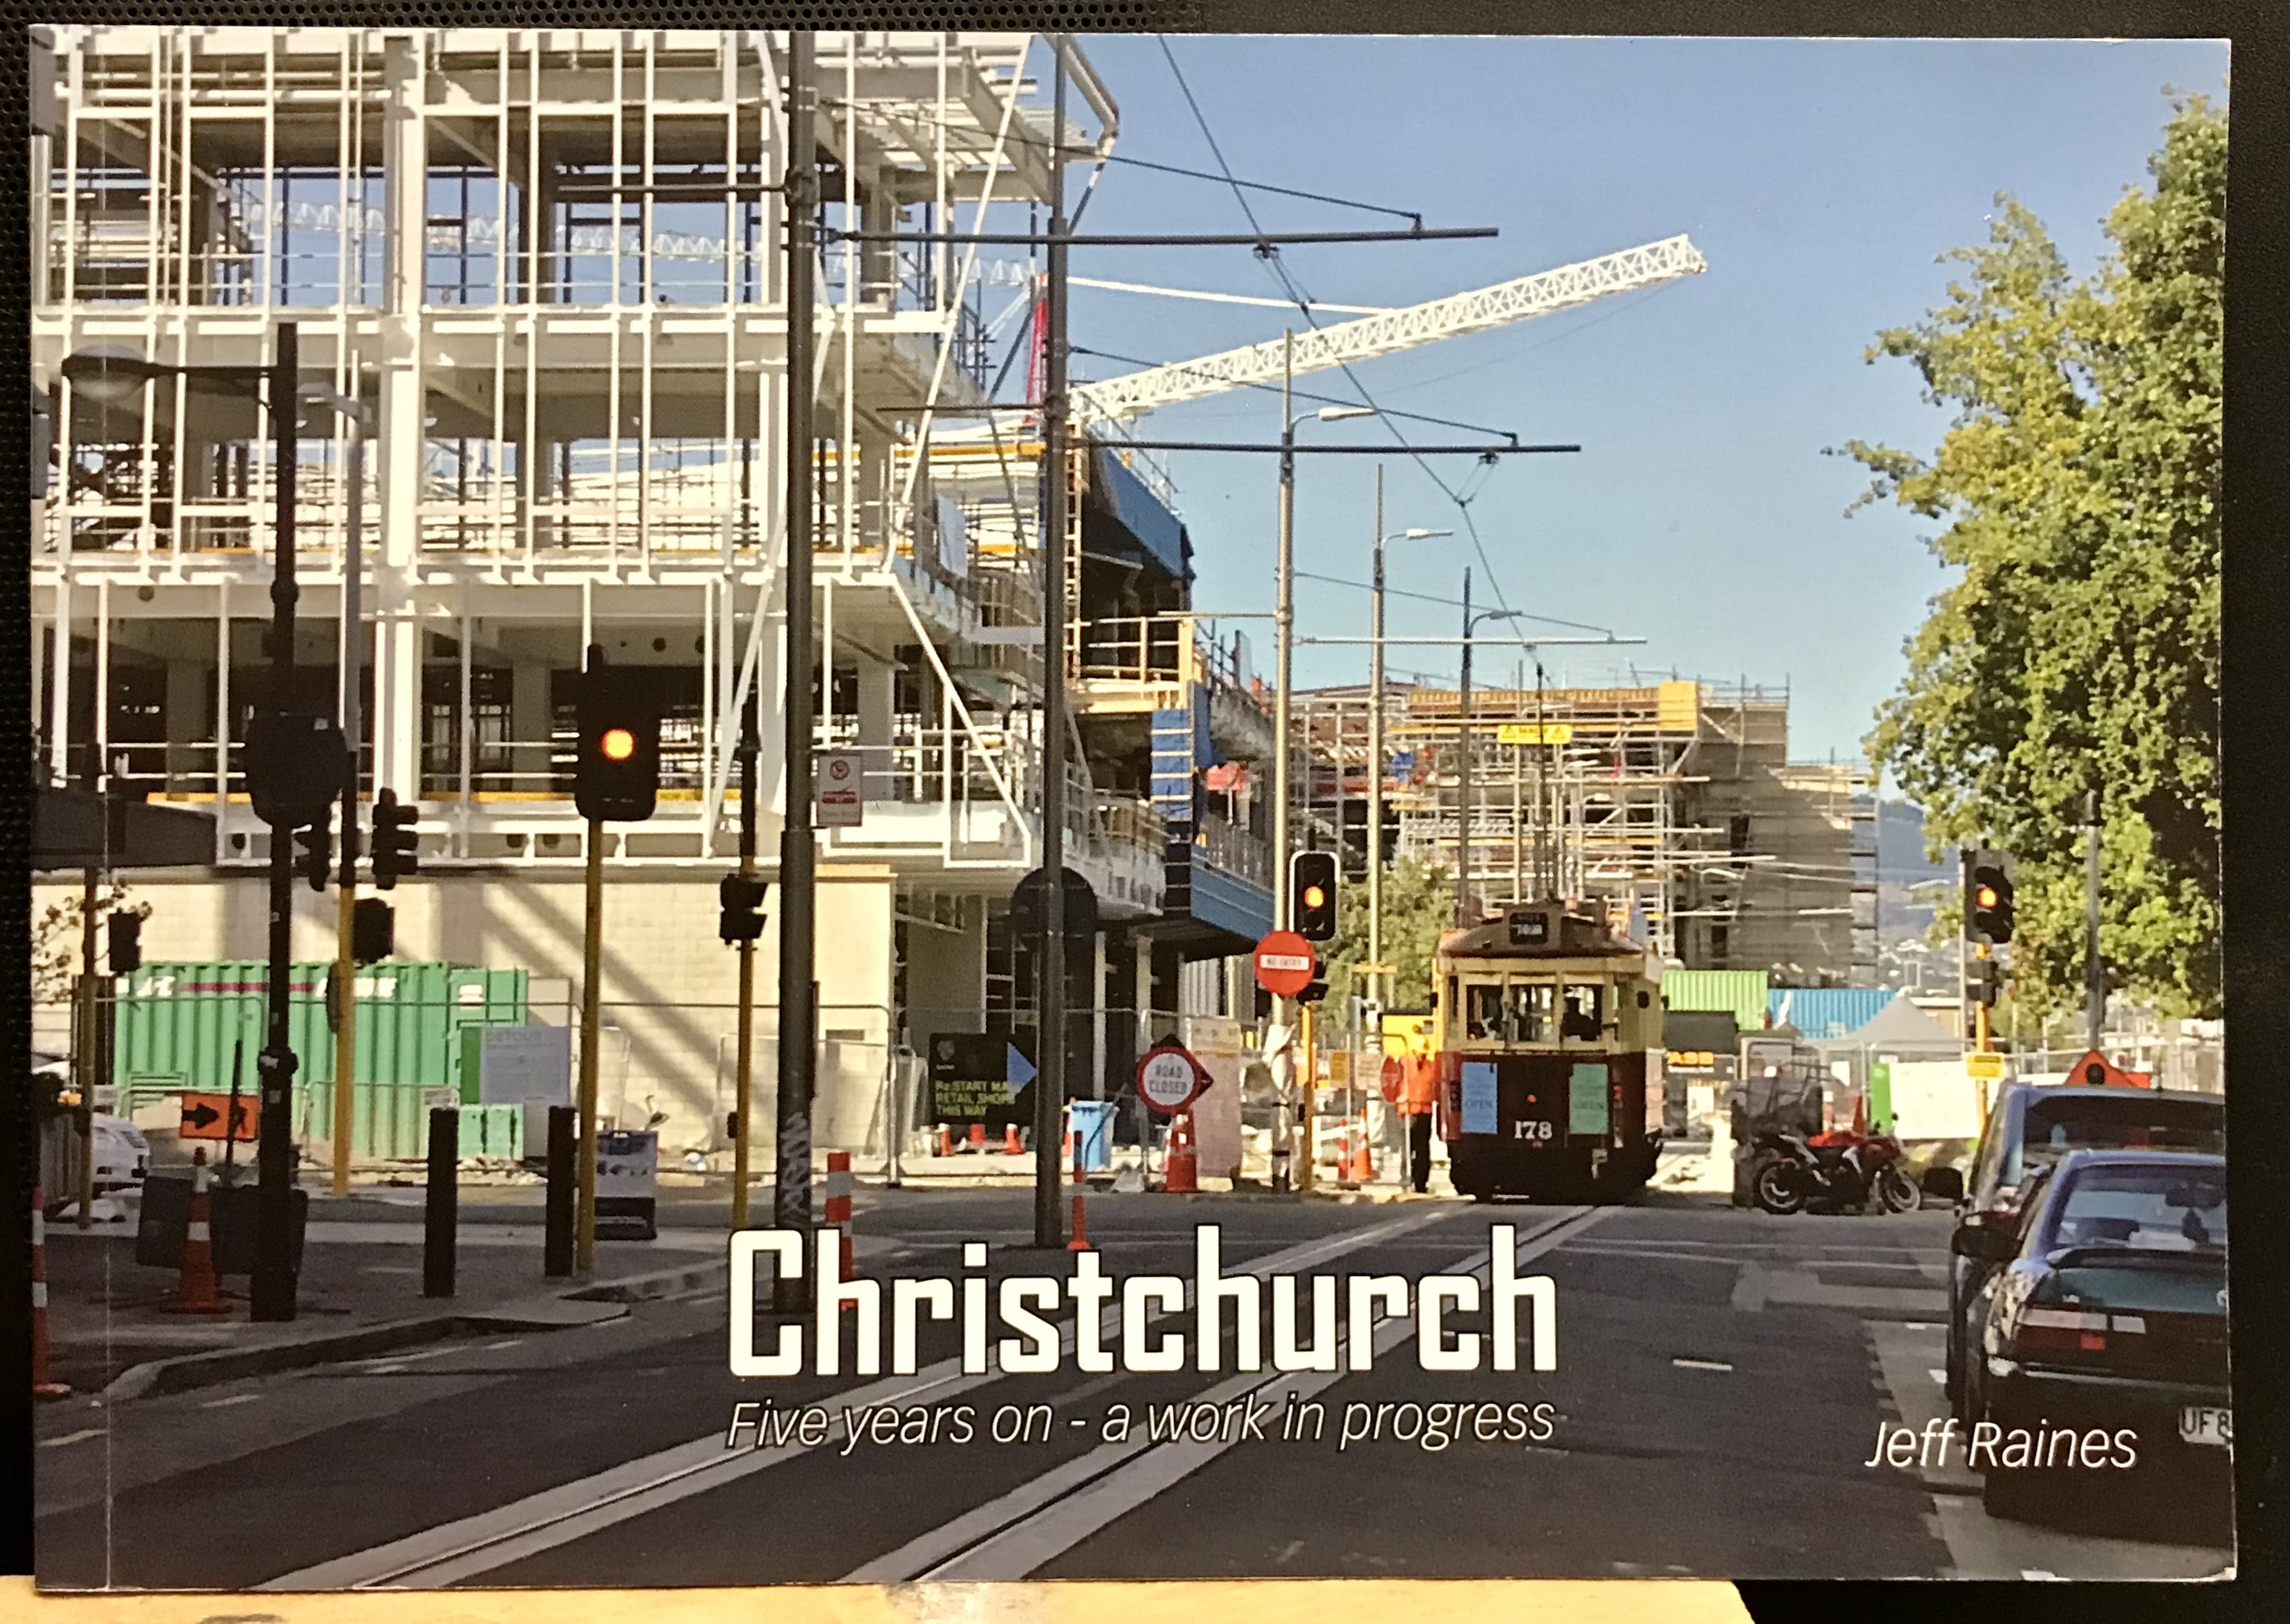 Christchurch Five Years On - A Work in Progress